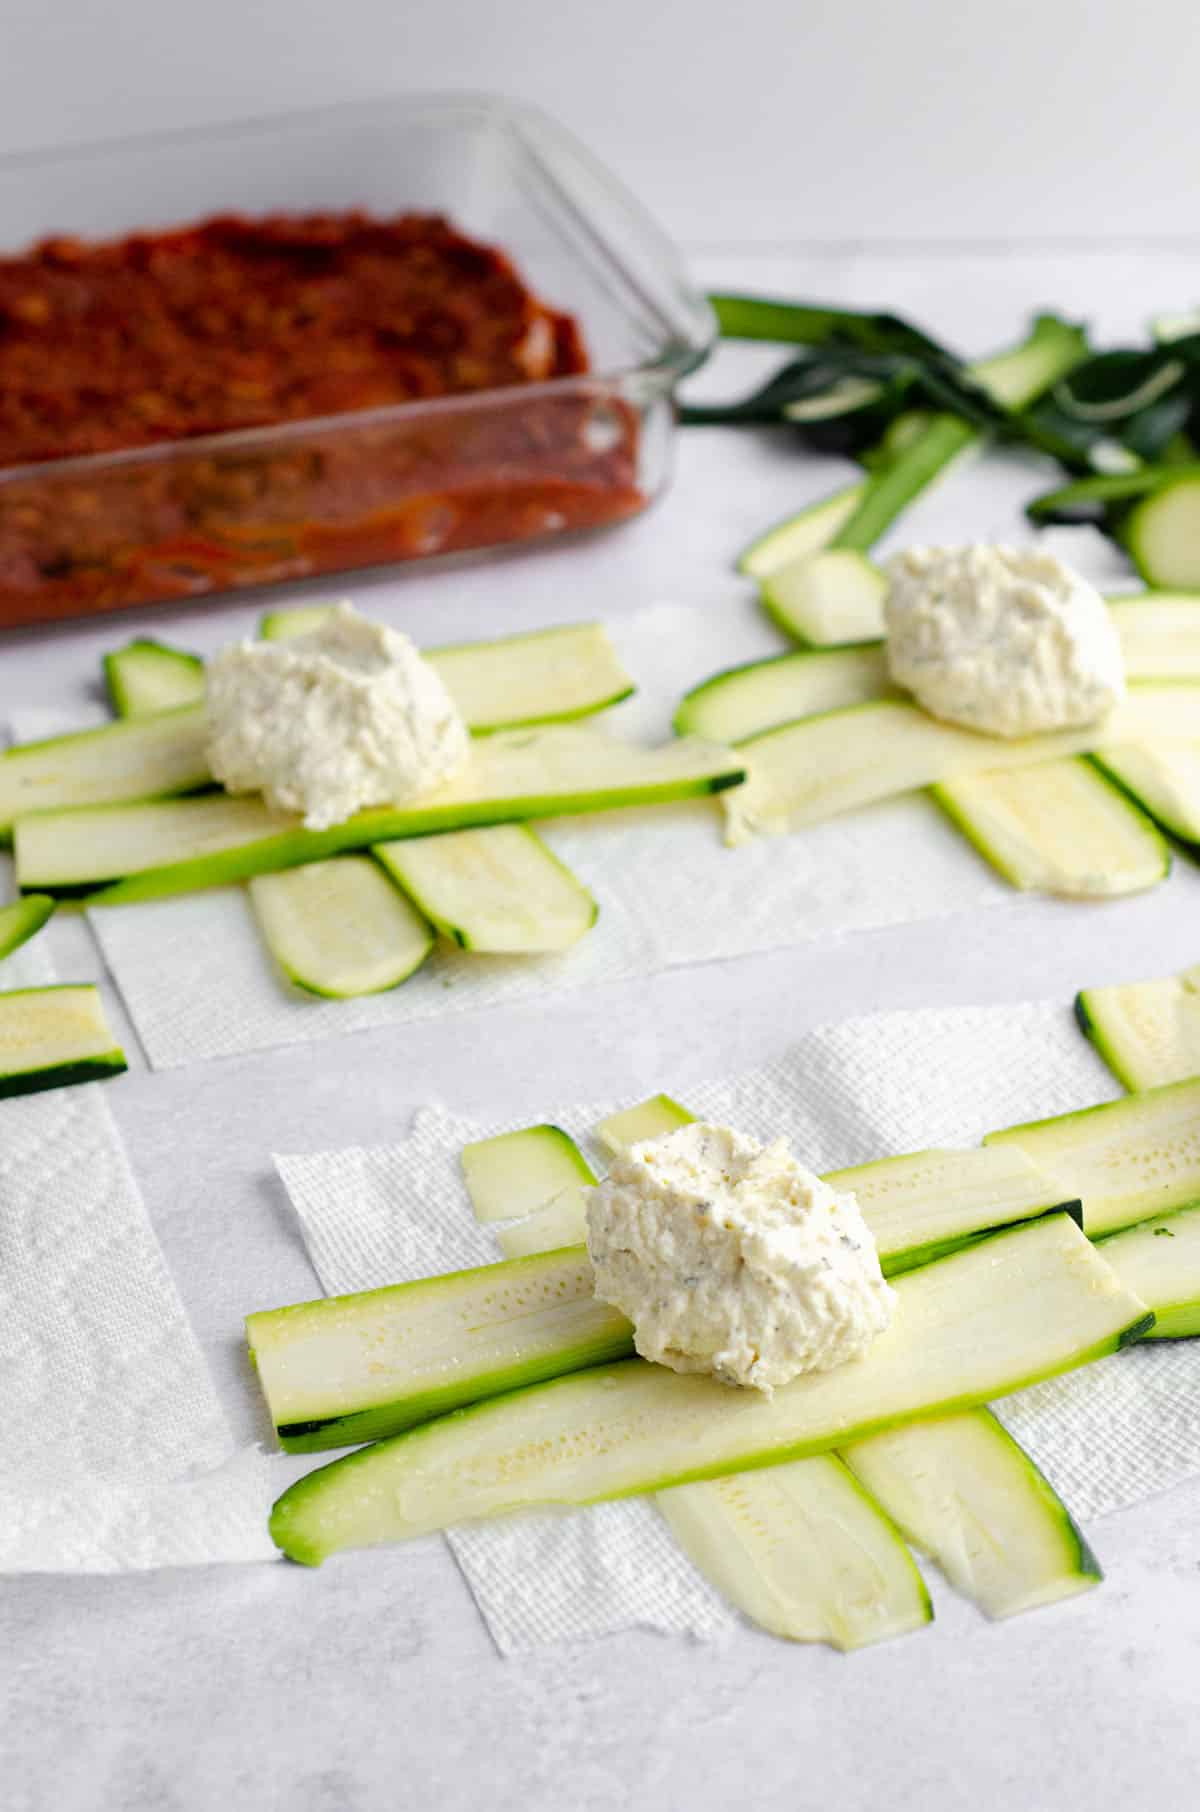 zucchini strips with a dollop of filling on the intersection to make zucchini ravioli